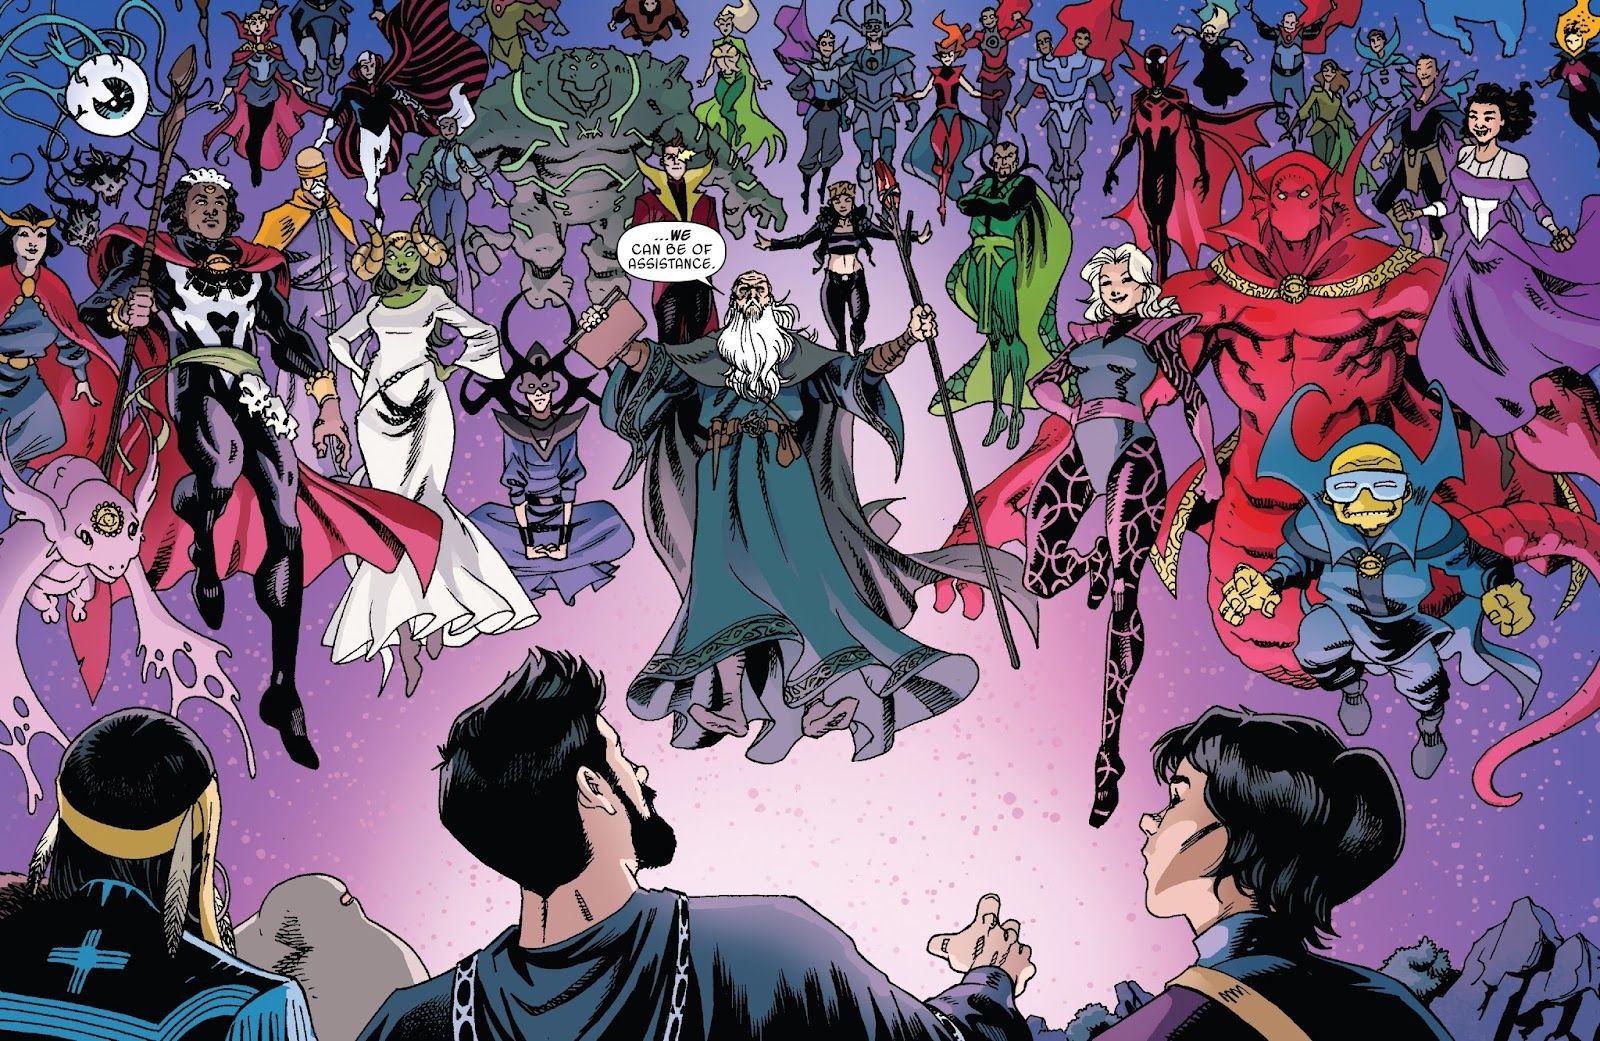 Who is the Sorcerer Supreme in the Guardians of the Galaxy's Future?